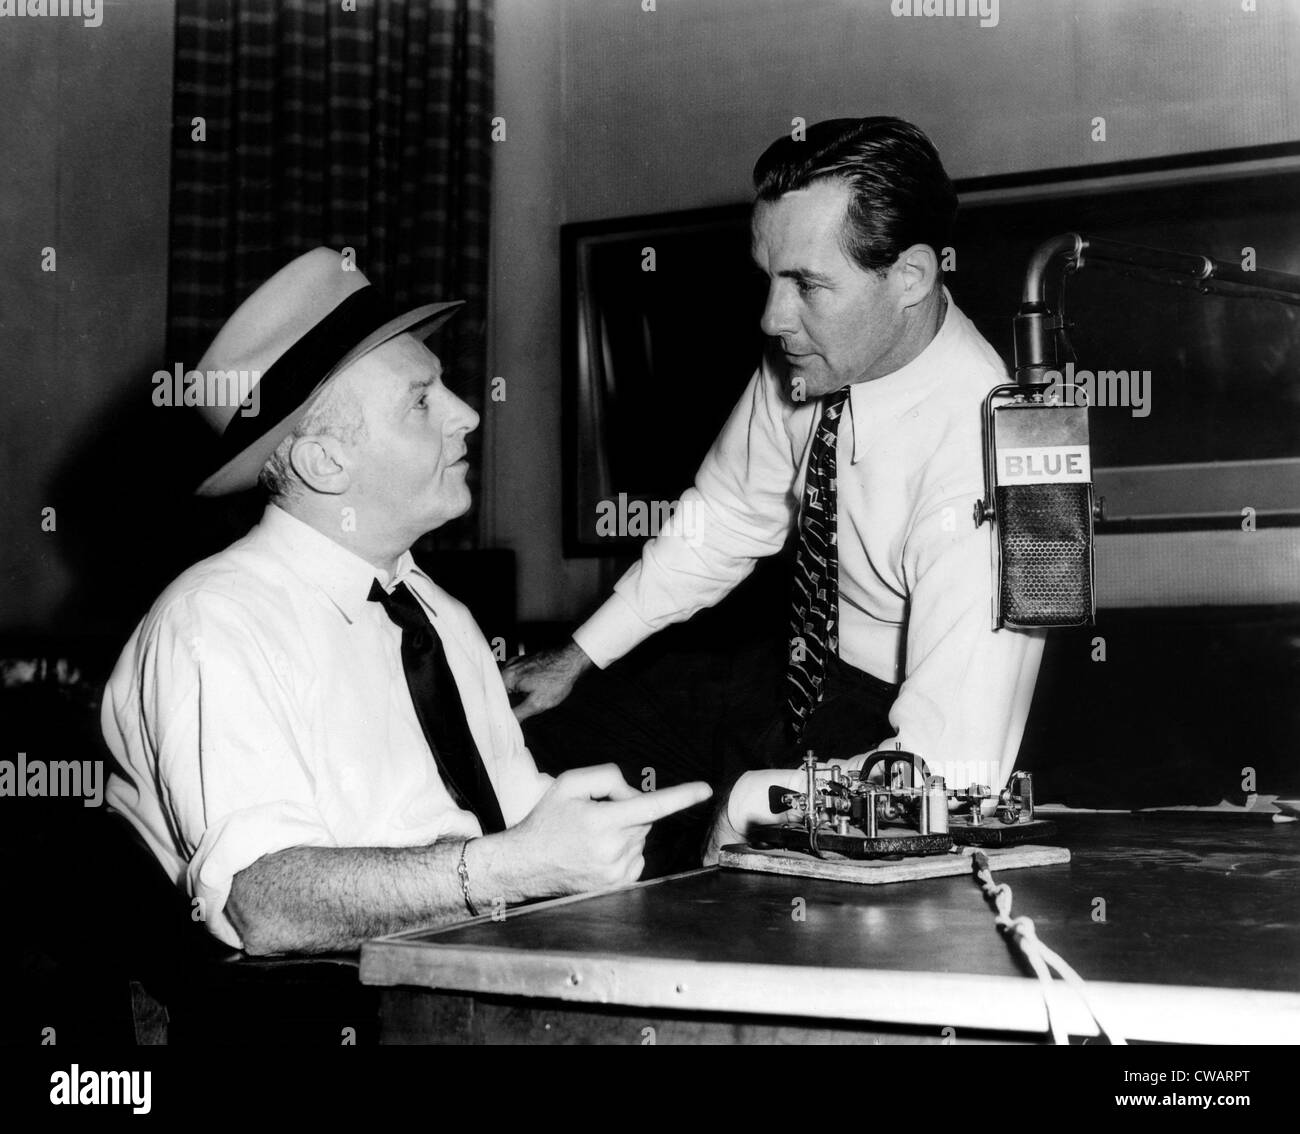 American radio commentators Walter Winchell (left), and Jimmy Fidler (right), just before going on the air for NBC's BLUE Stock Photo